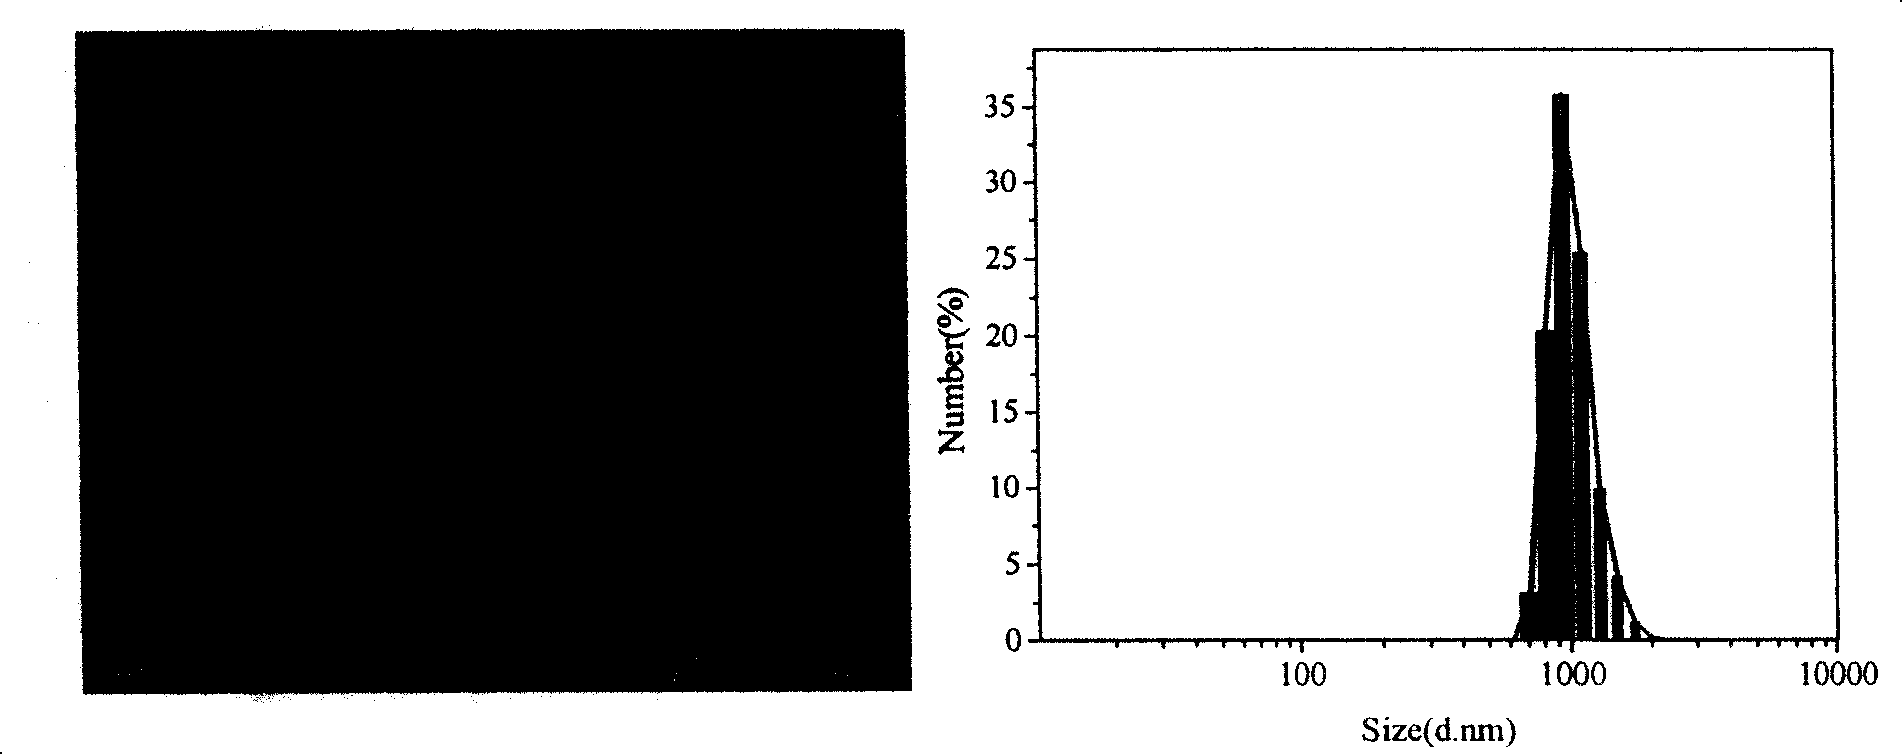 Chemical preparation method of silver dendritic structure period arrangement